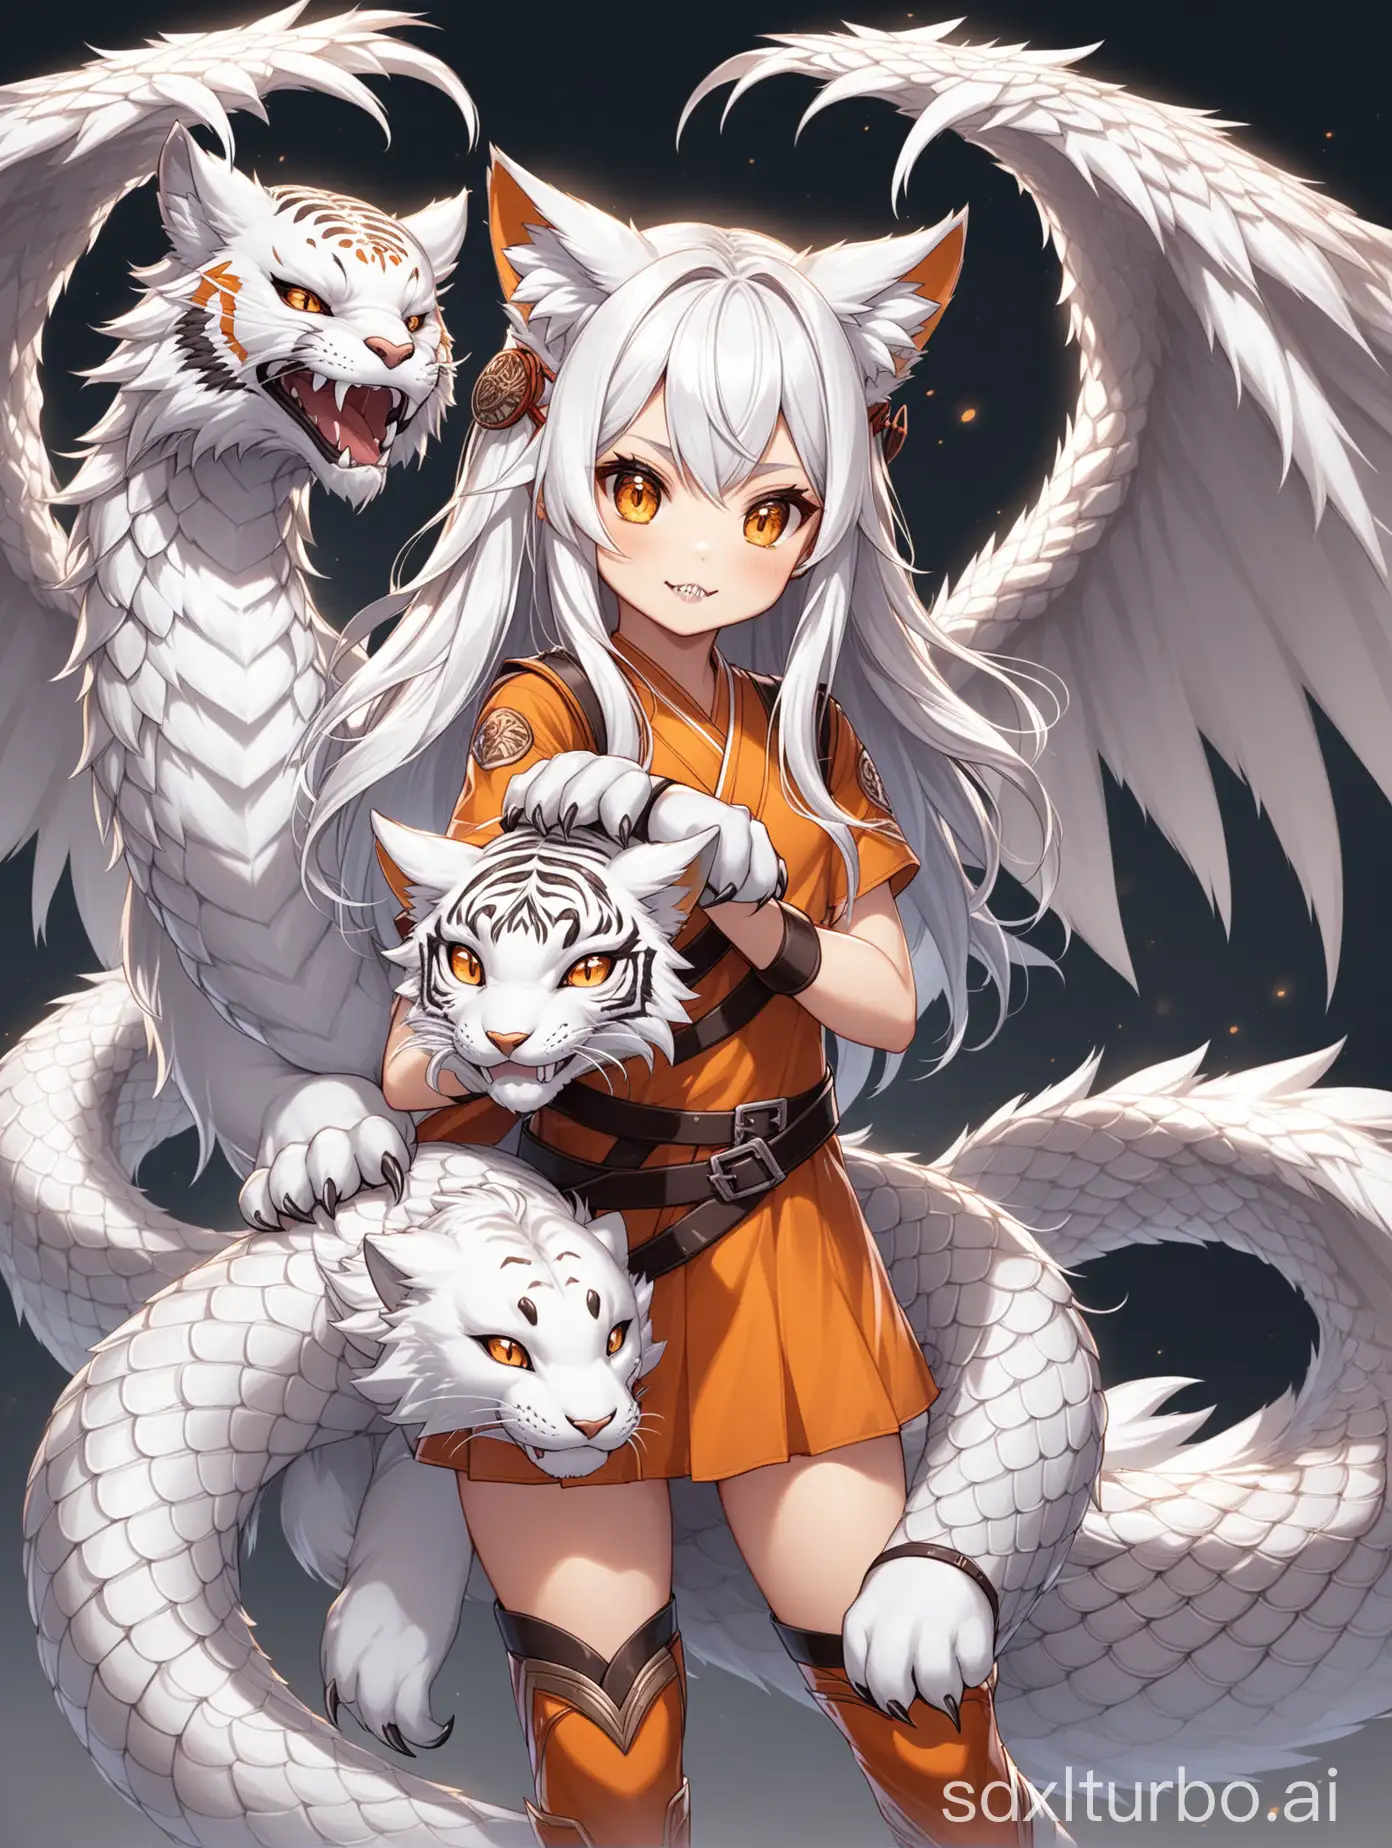 Mythical-Creature-Enchanting-9Tailed-Fox-Girl-with-Dragon-Scales-and-Eagle-Wings